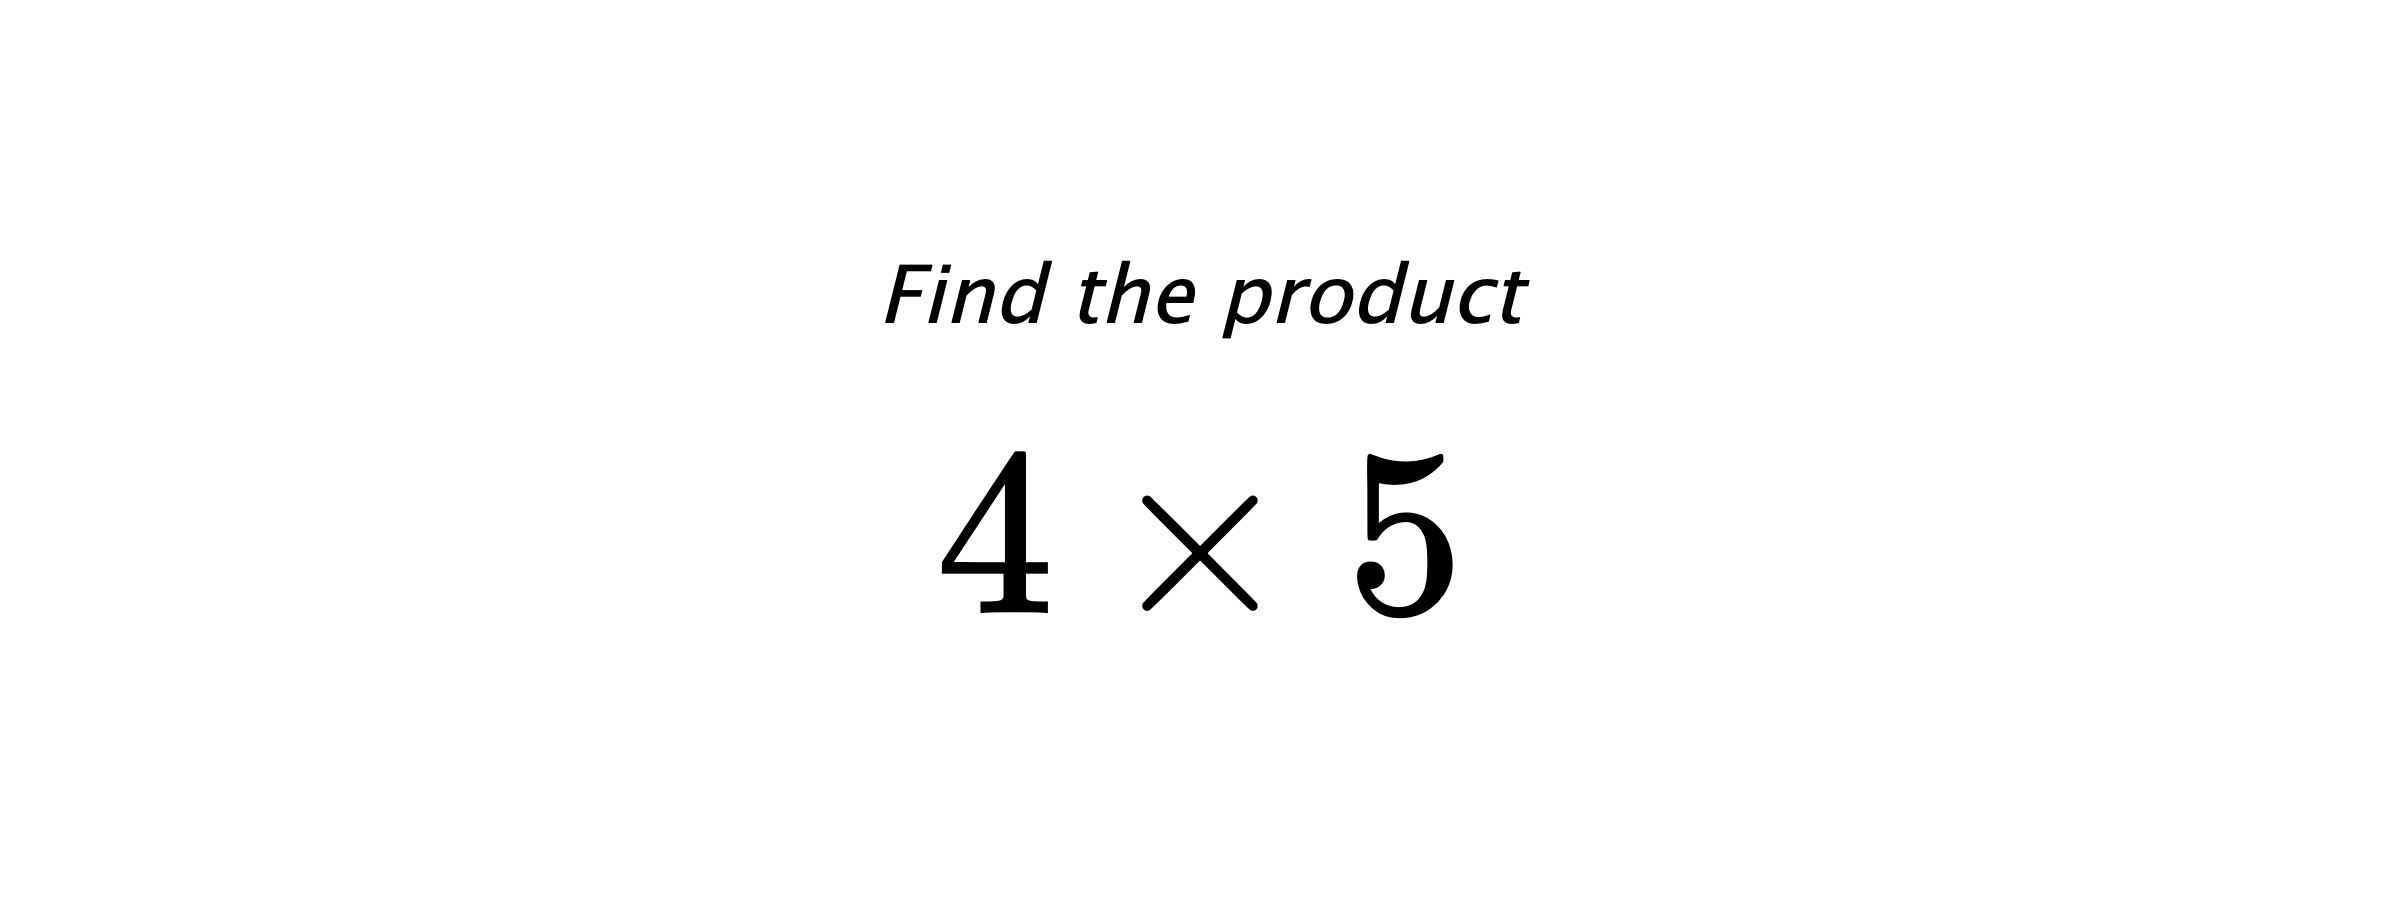 Find the product $ 4 \times 5 $